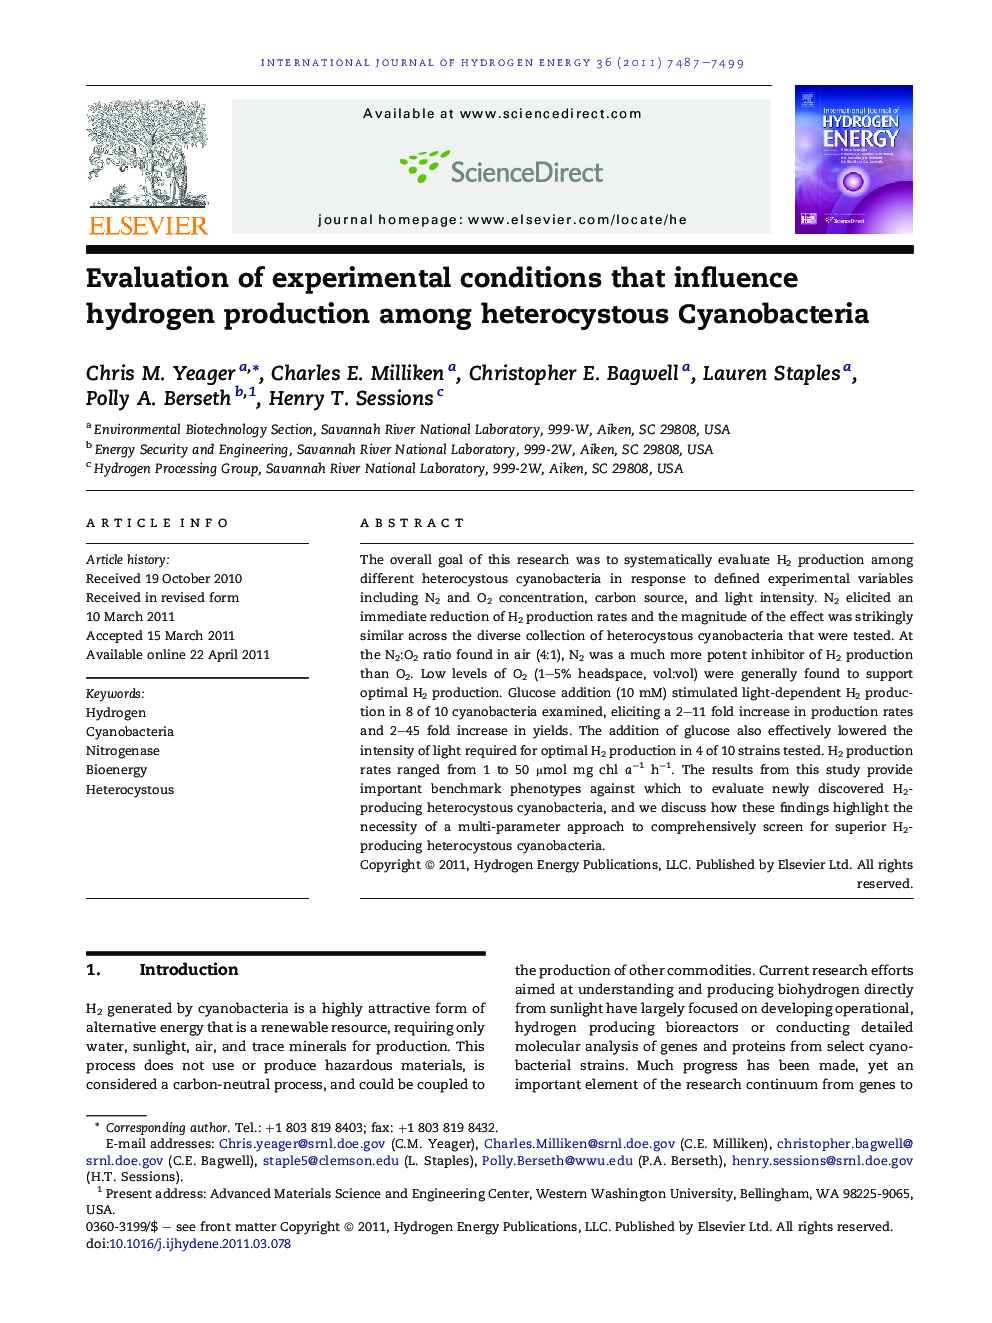 Evaluation of experimental conditions that influence hydrogen production among heterocystous Cyanobacteria